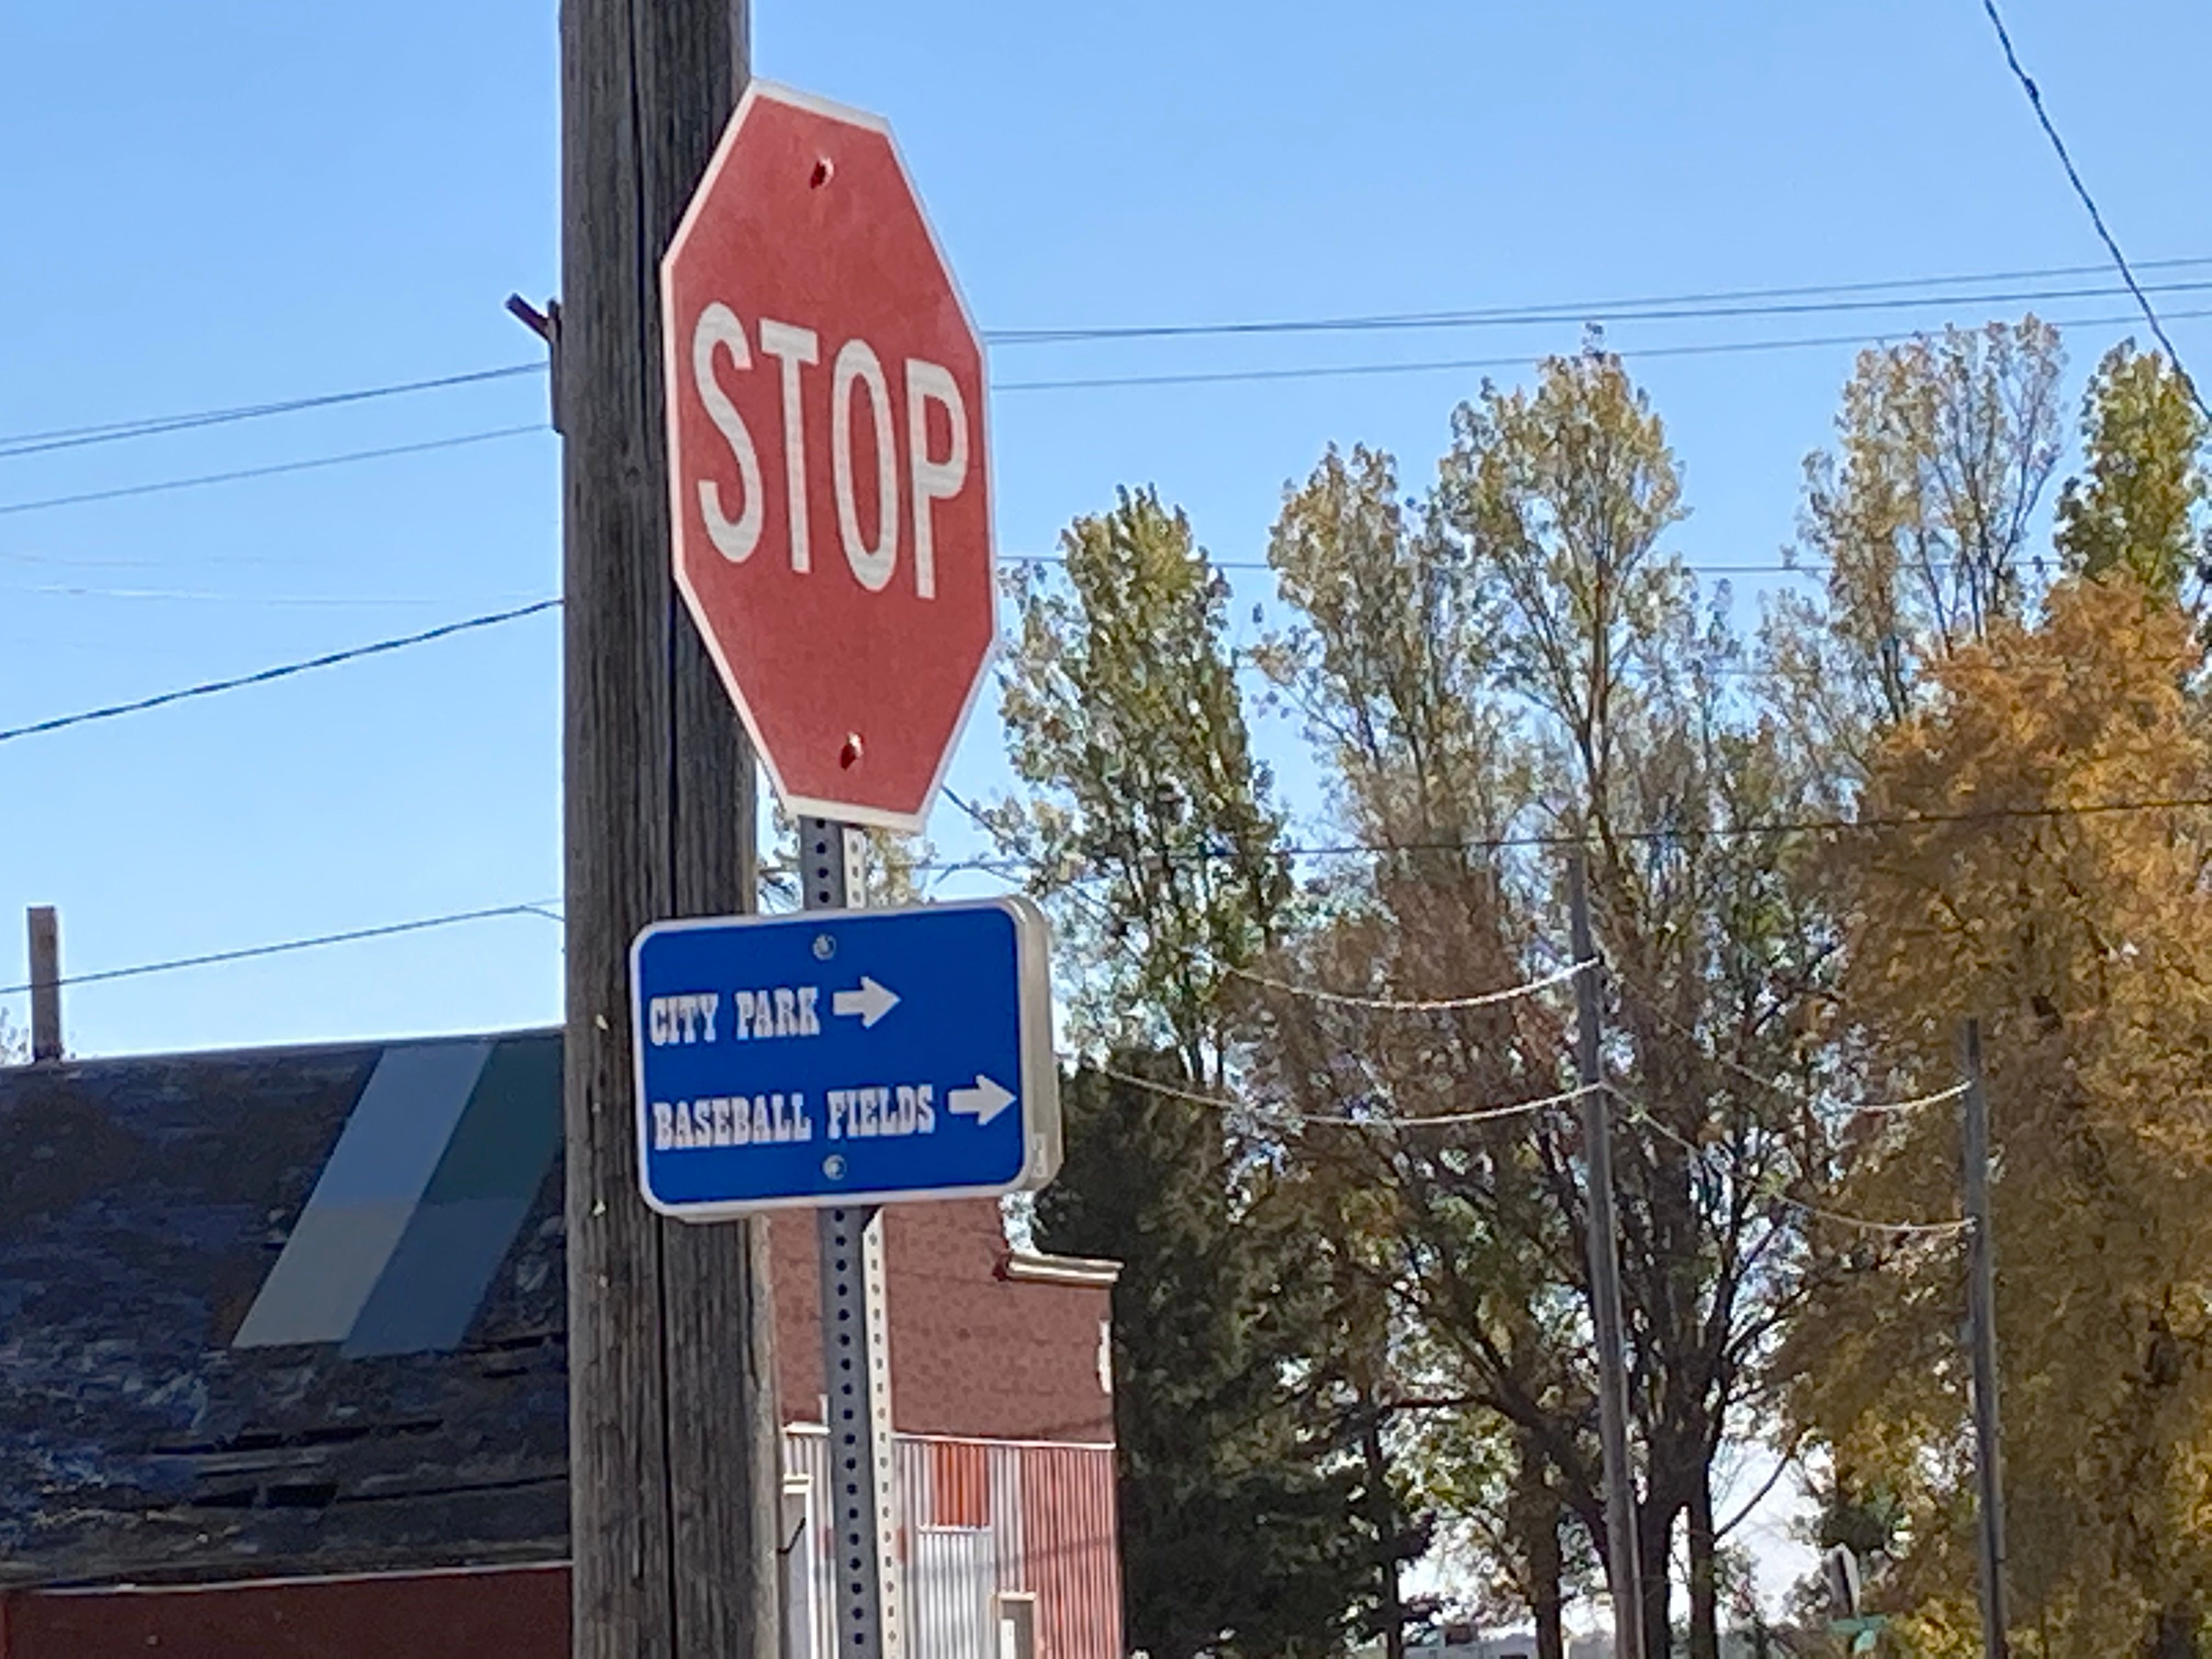 Look for this small sign at the stop sign in town, otherwise you could miss it!